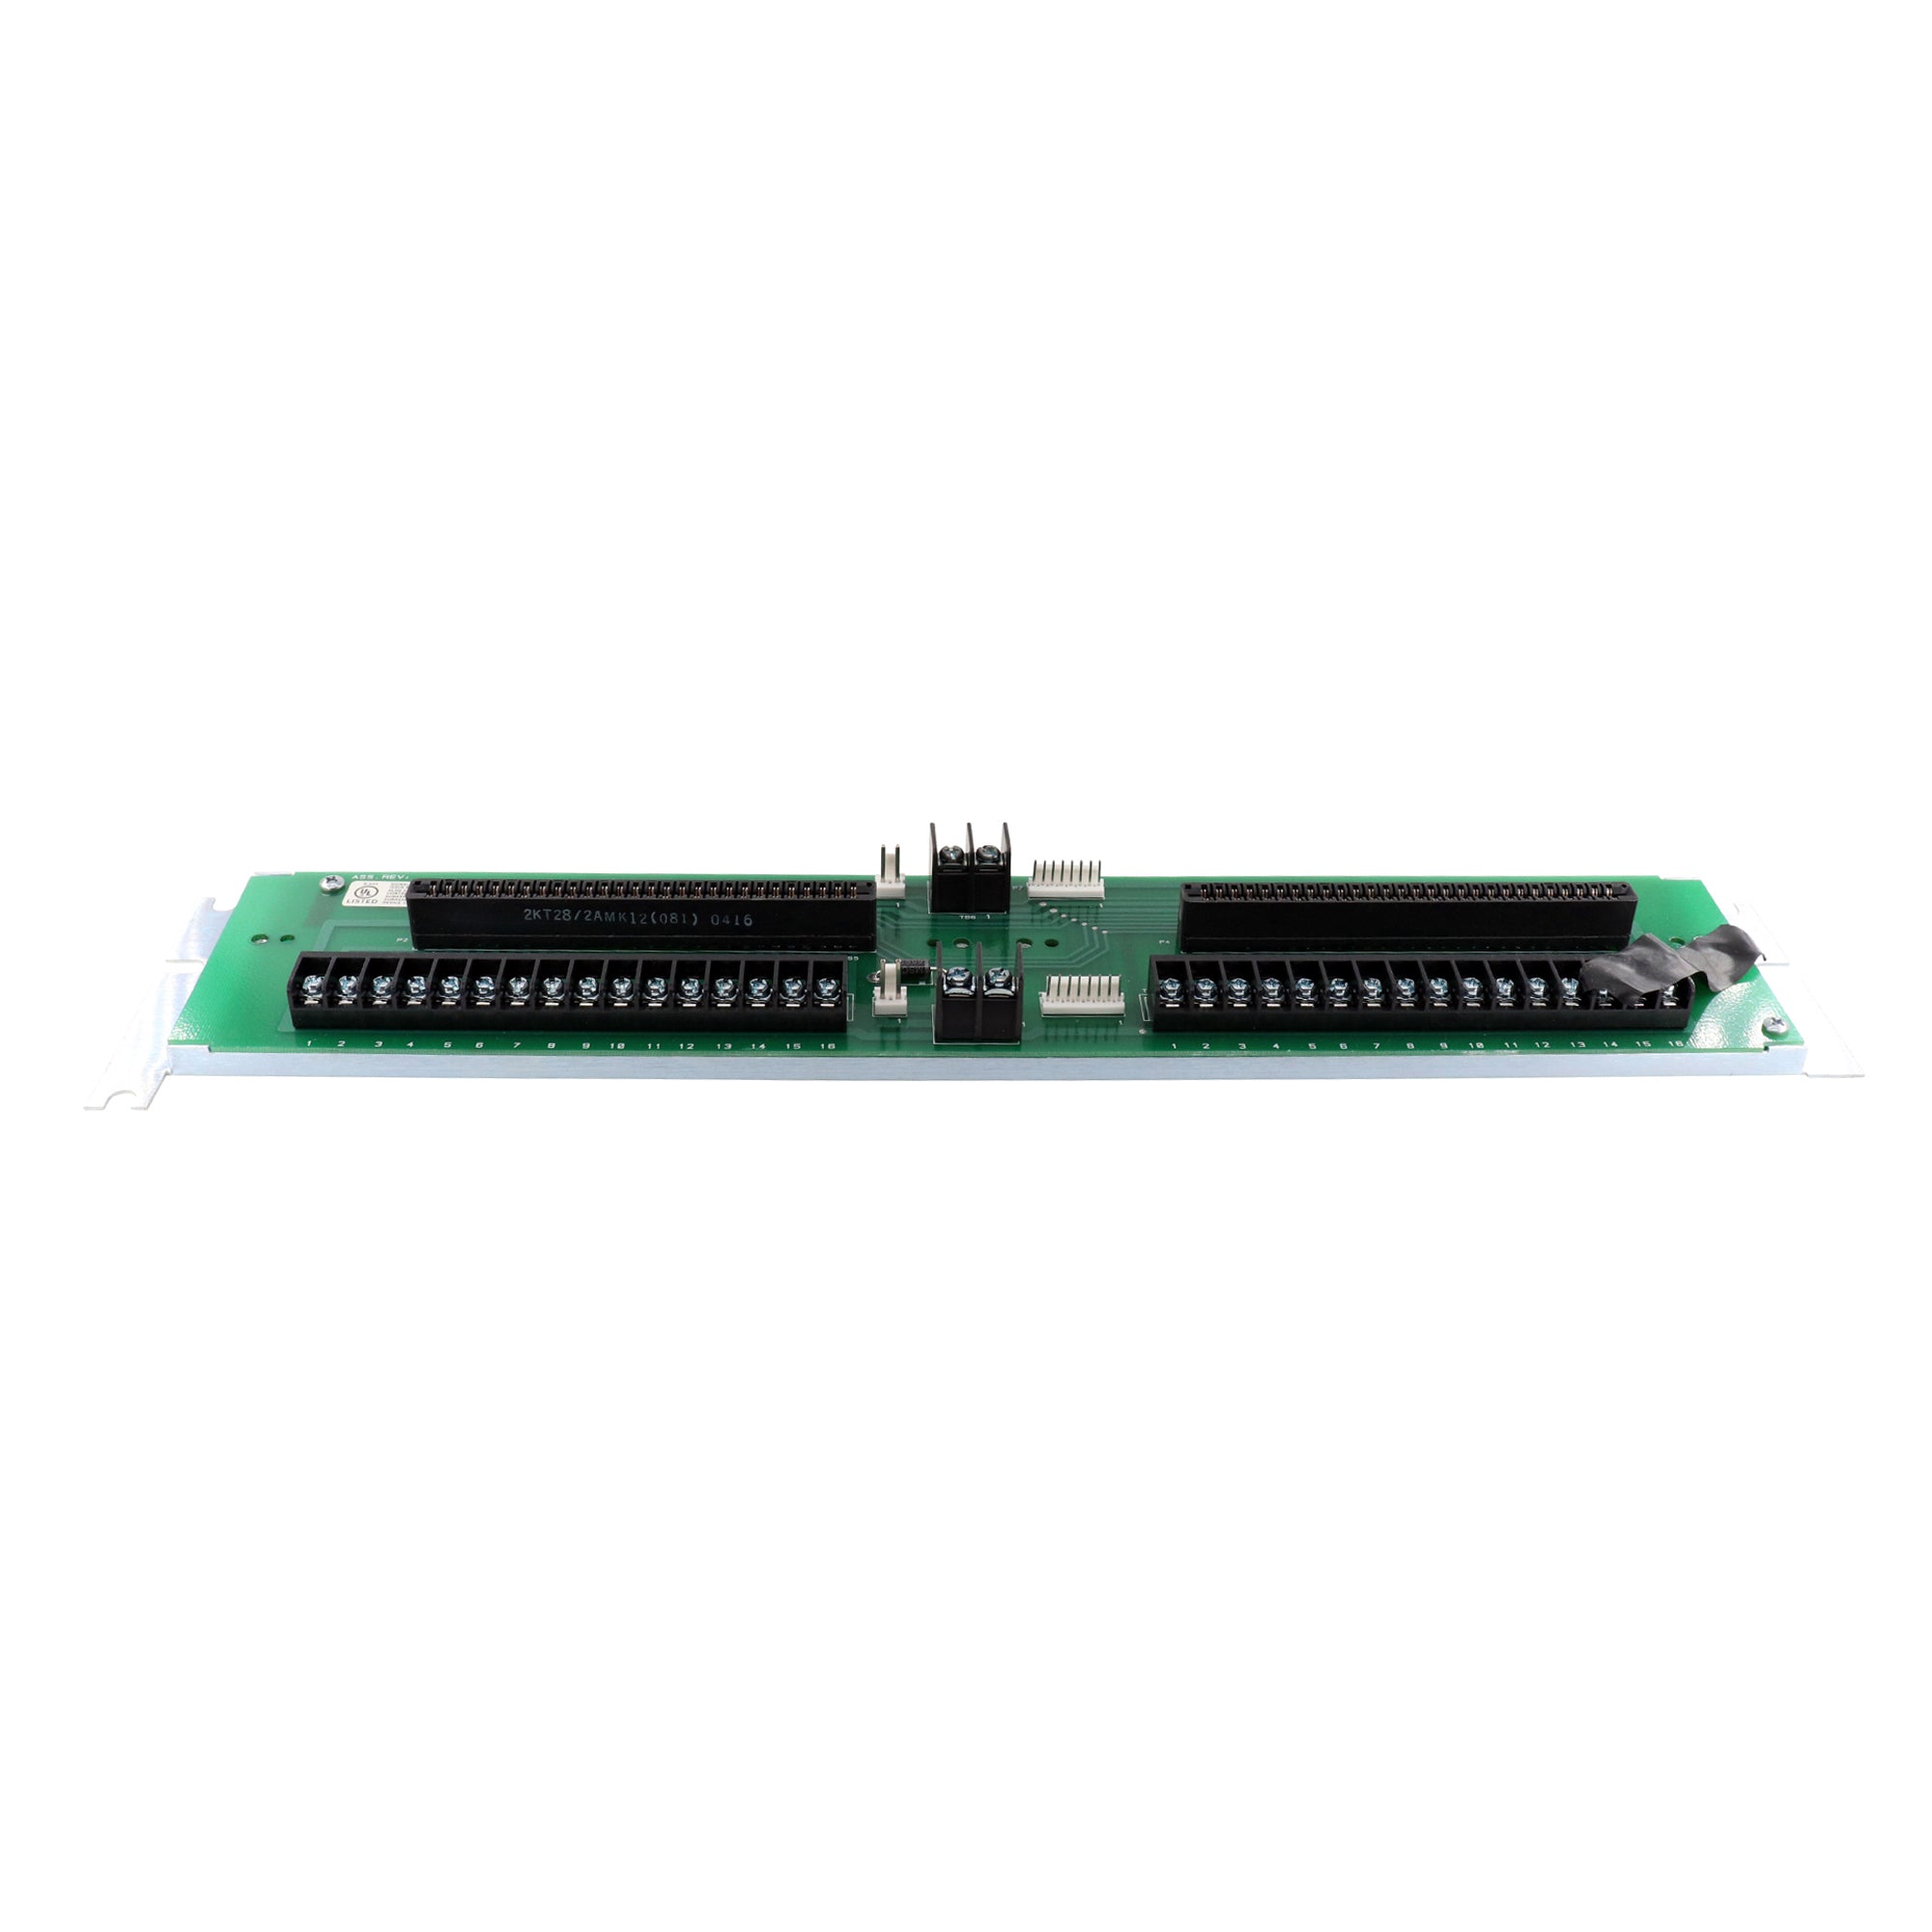 SIEMENS MOM-2 500-892766 EXPANSION CARD CAGE CIRCUIT BOARD MODULE